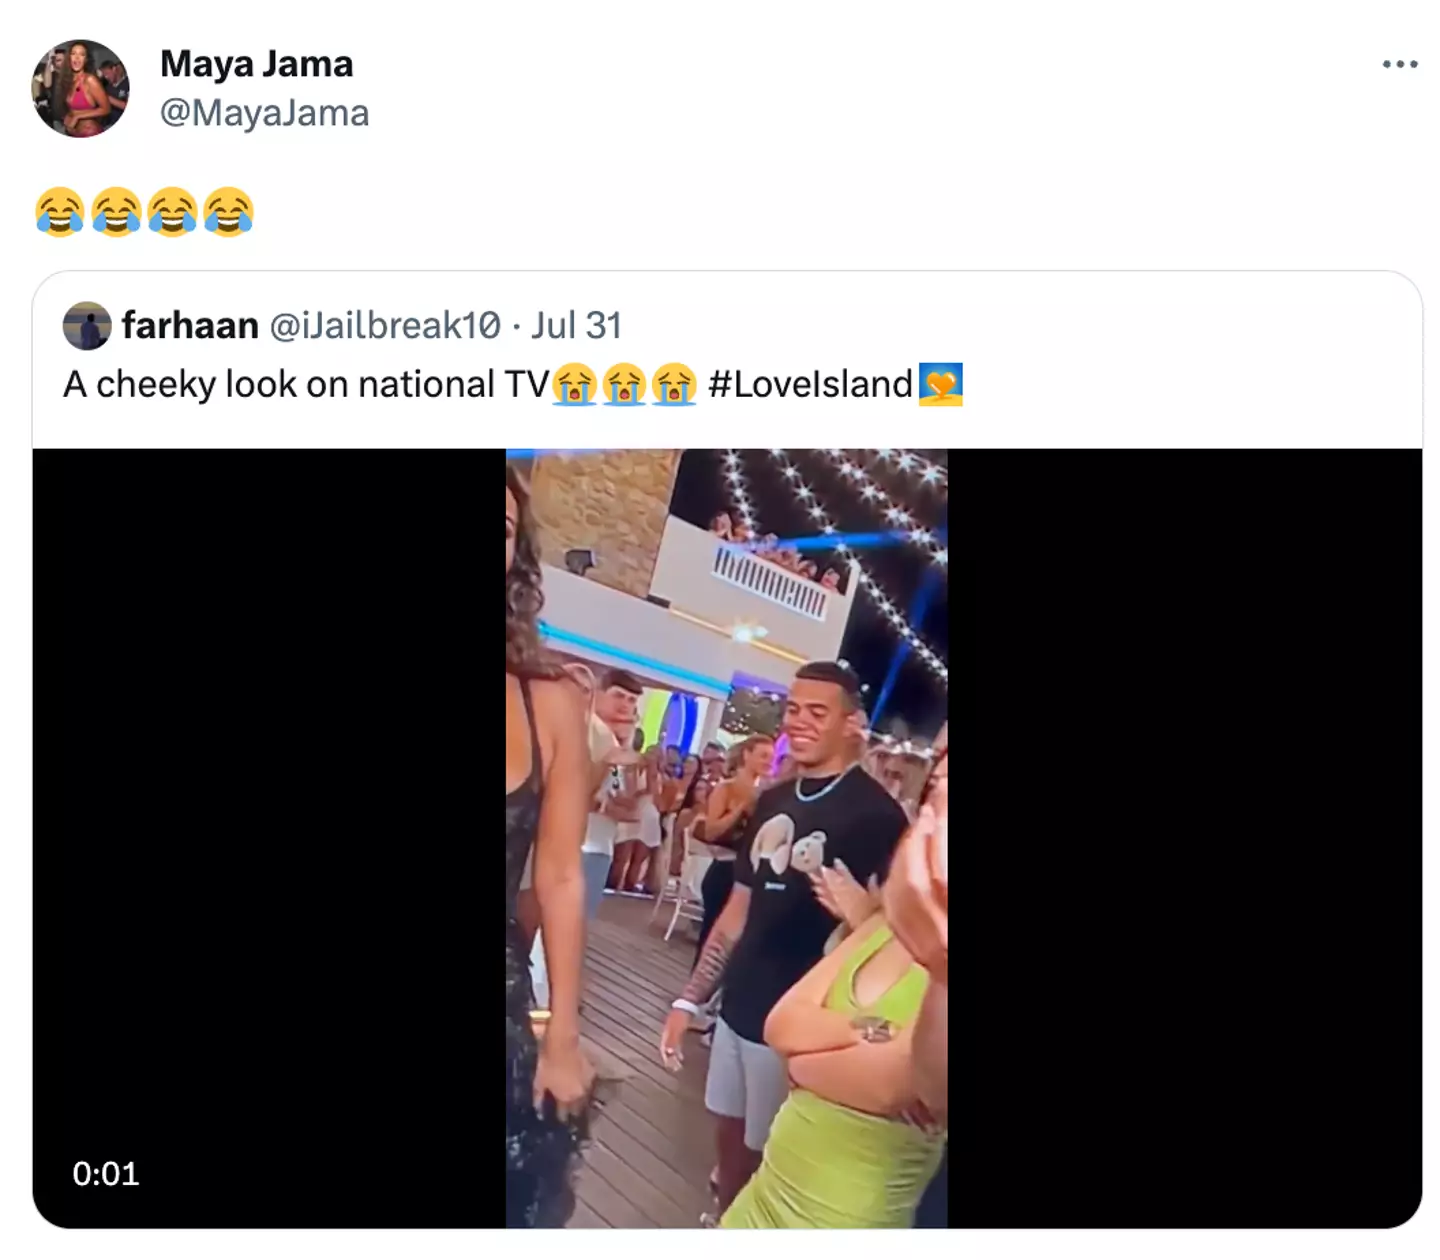 Maya Jama has reacted to the man checking her out.